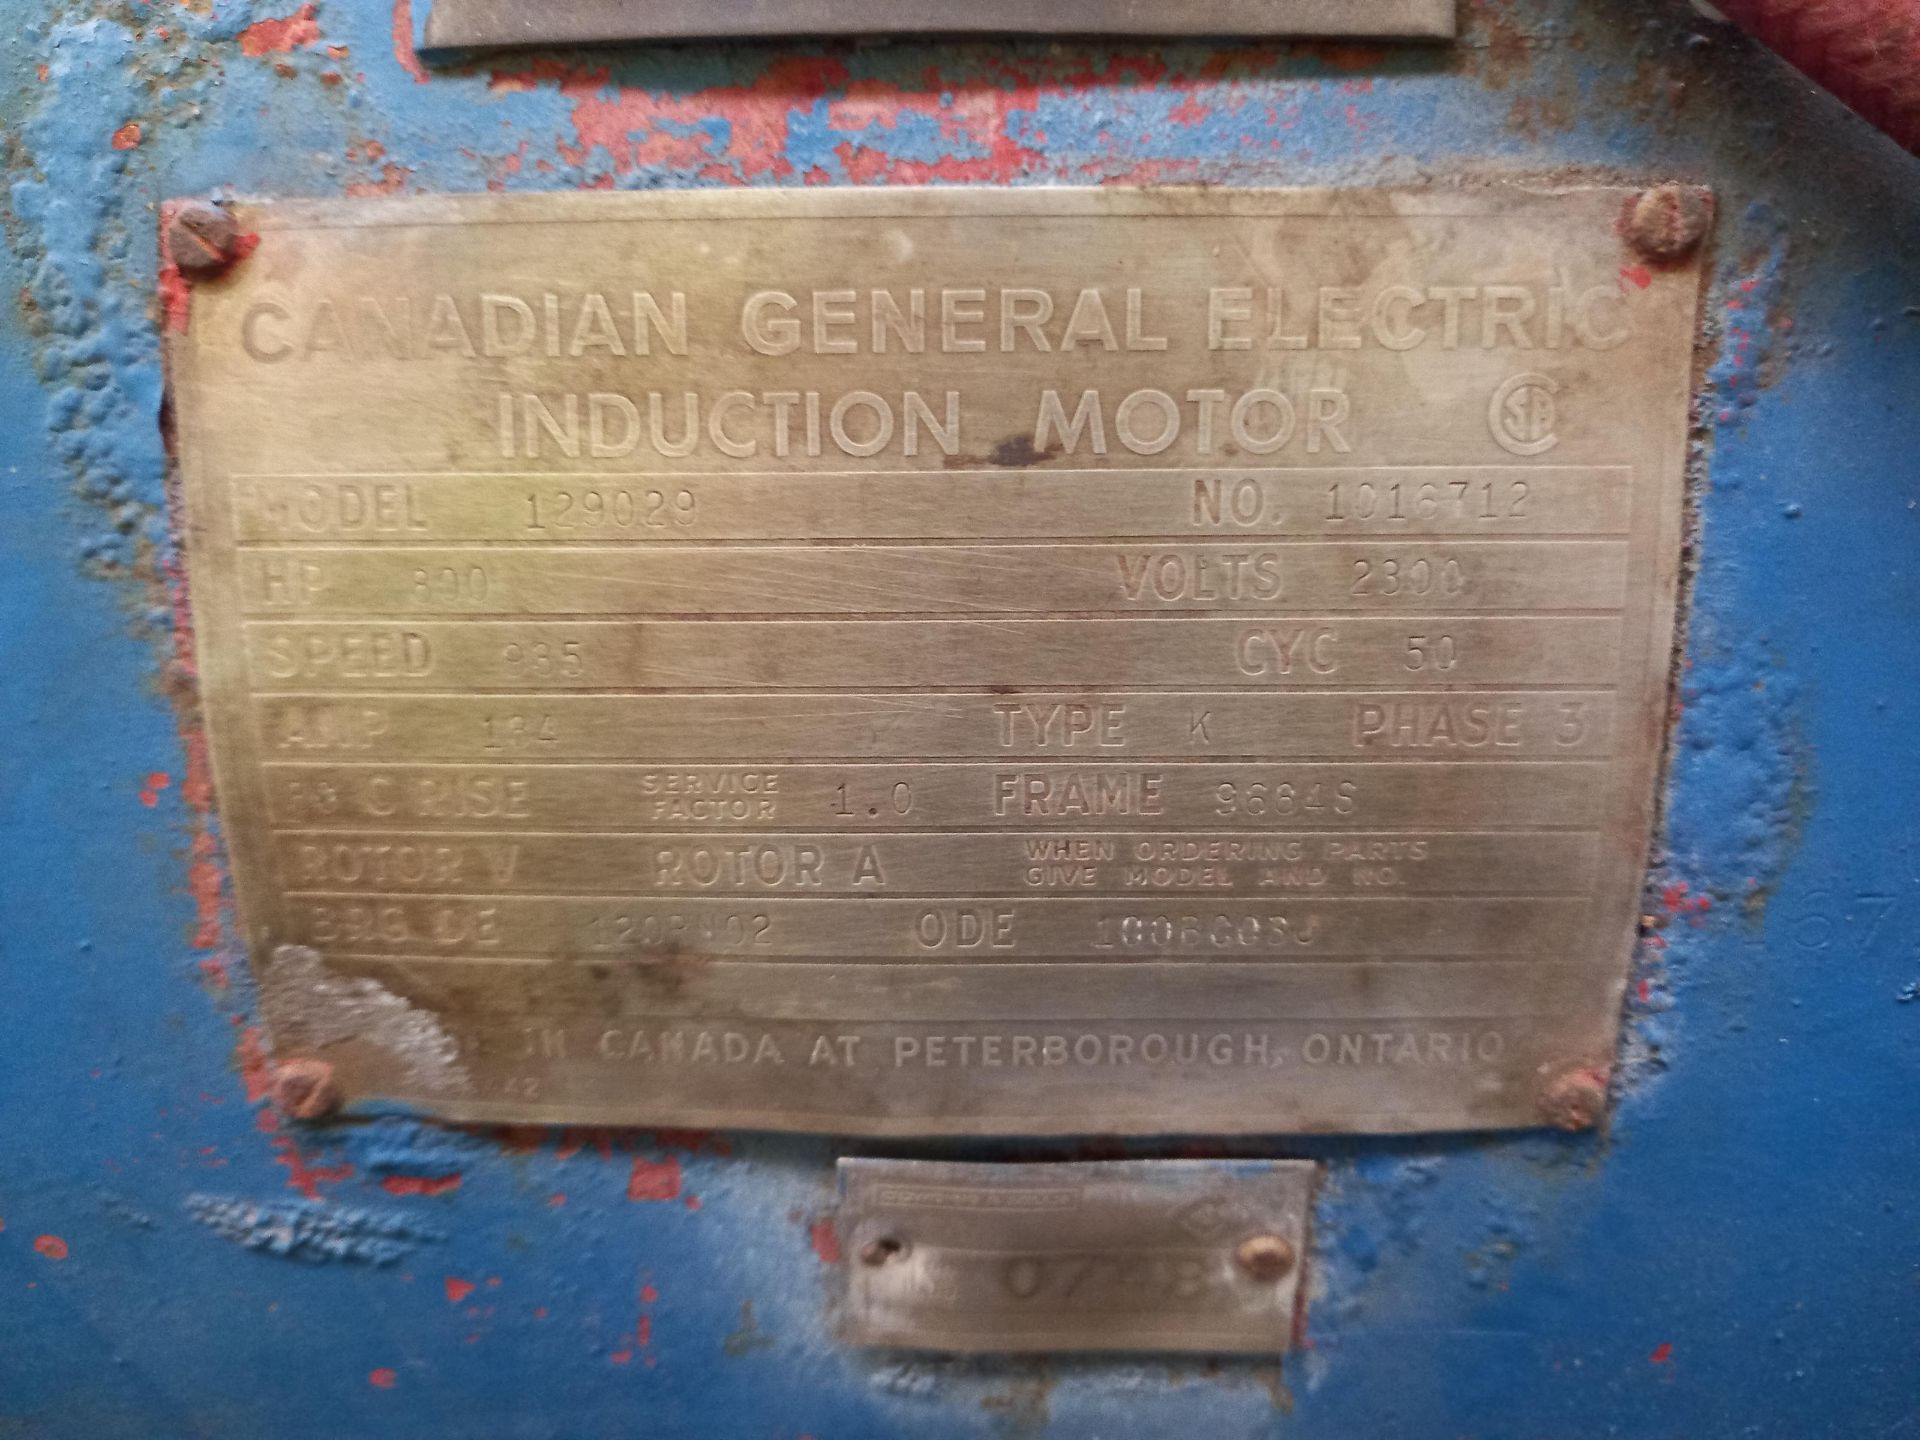 Canadian General Electric 800HP Induction Motor - Image 3 of 3